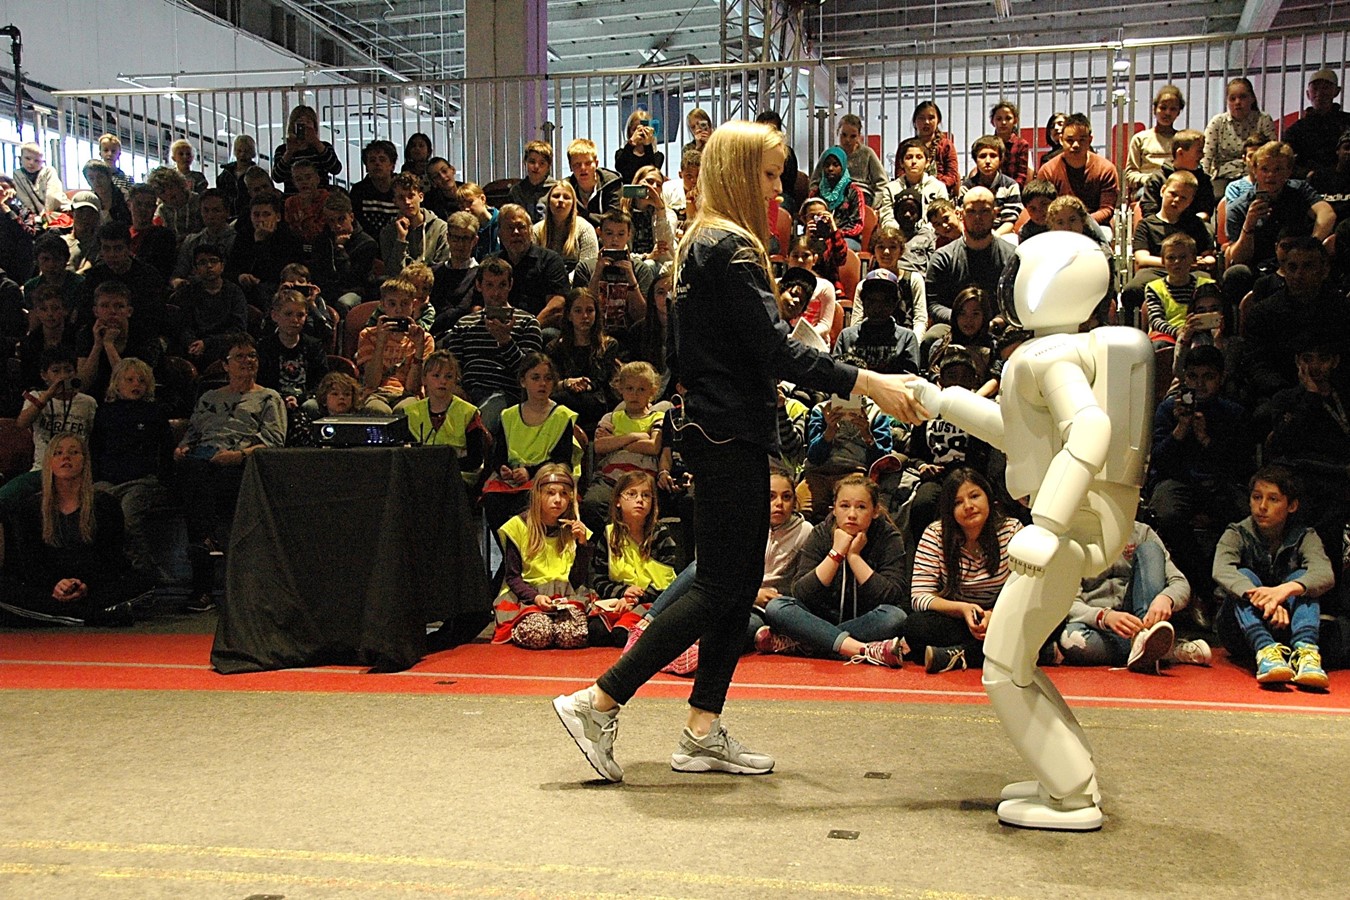 ALL-NEW ASIMO EXTENDS DANISH TRIP TO INSPIRE LOCAL CHILDREN